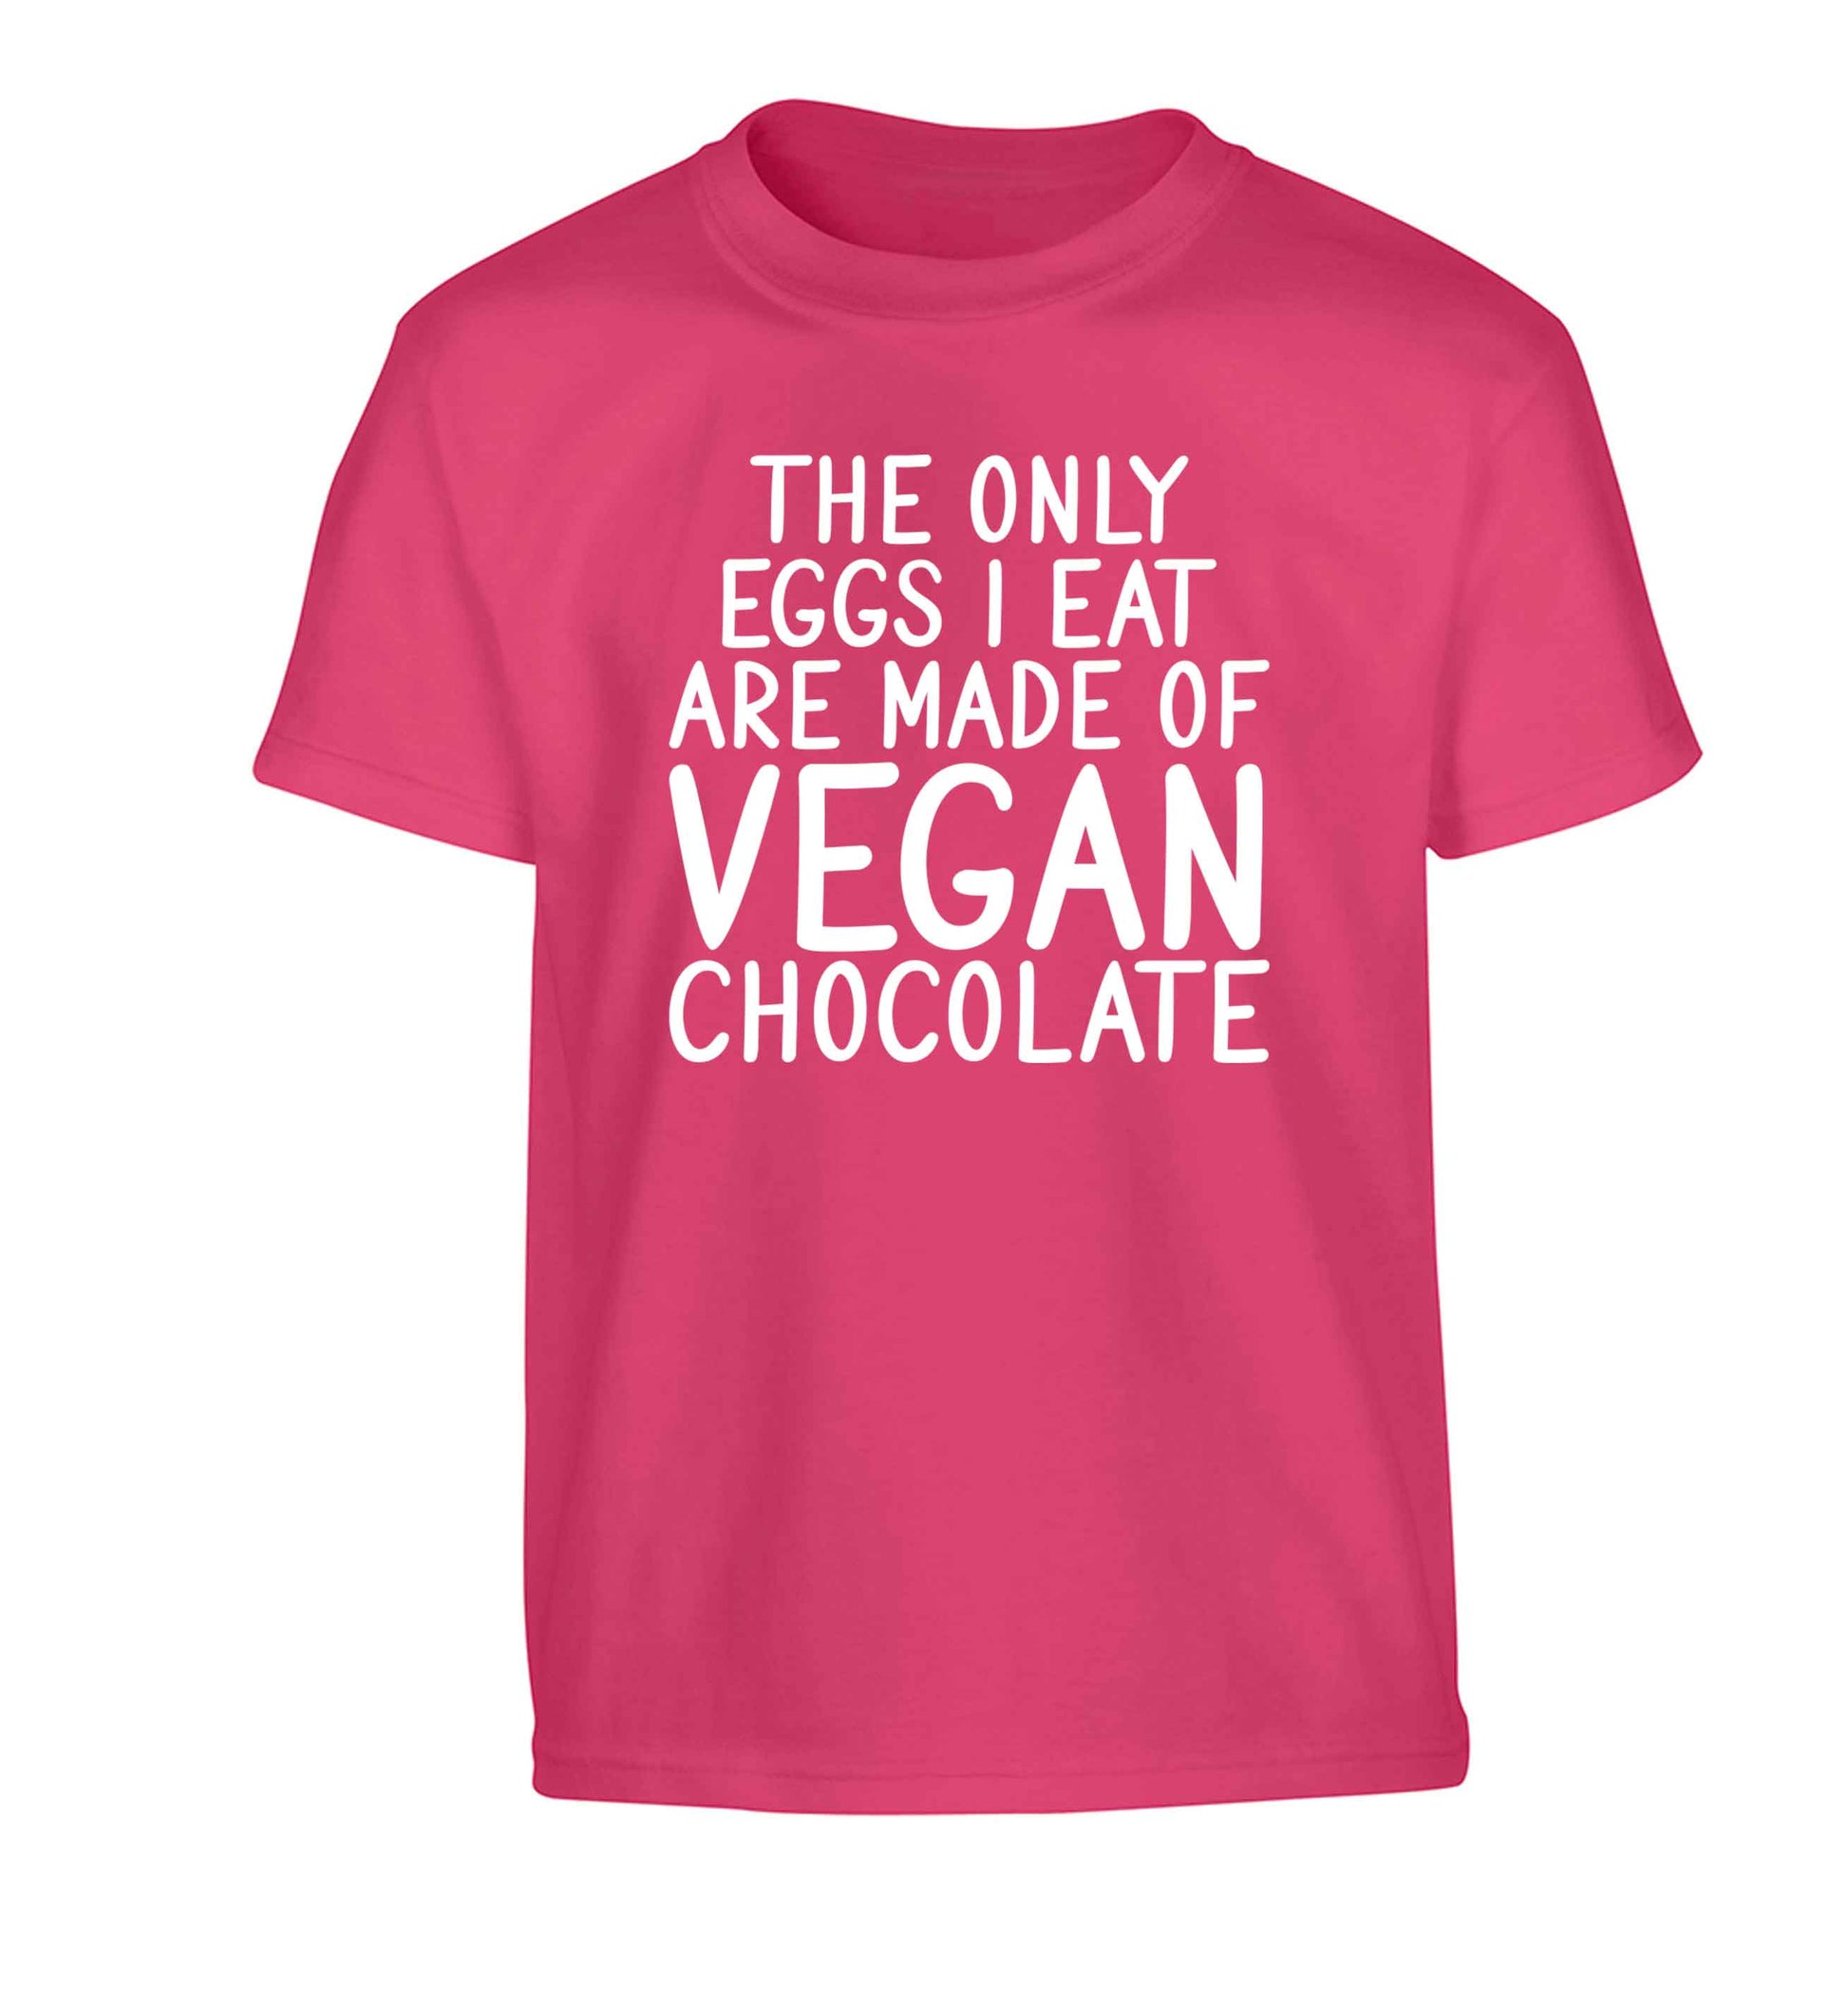 The only eggs I eat are made of vegan chocolate Children's pink Tshirt 12-13 Years